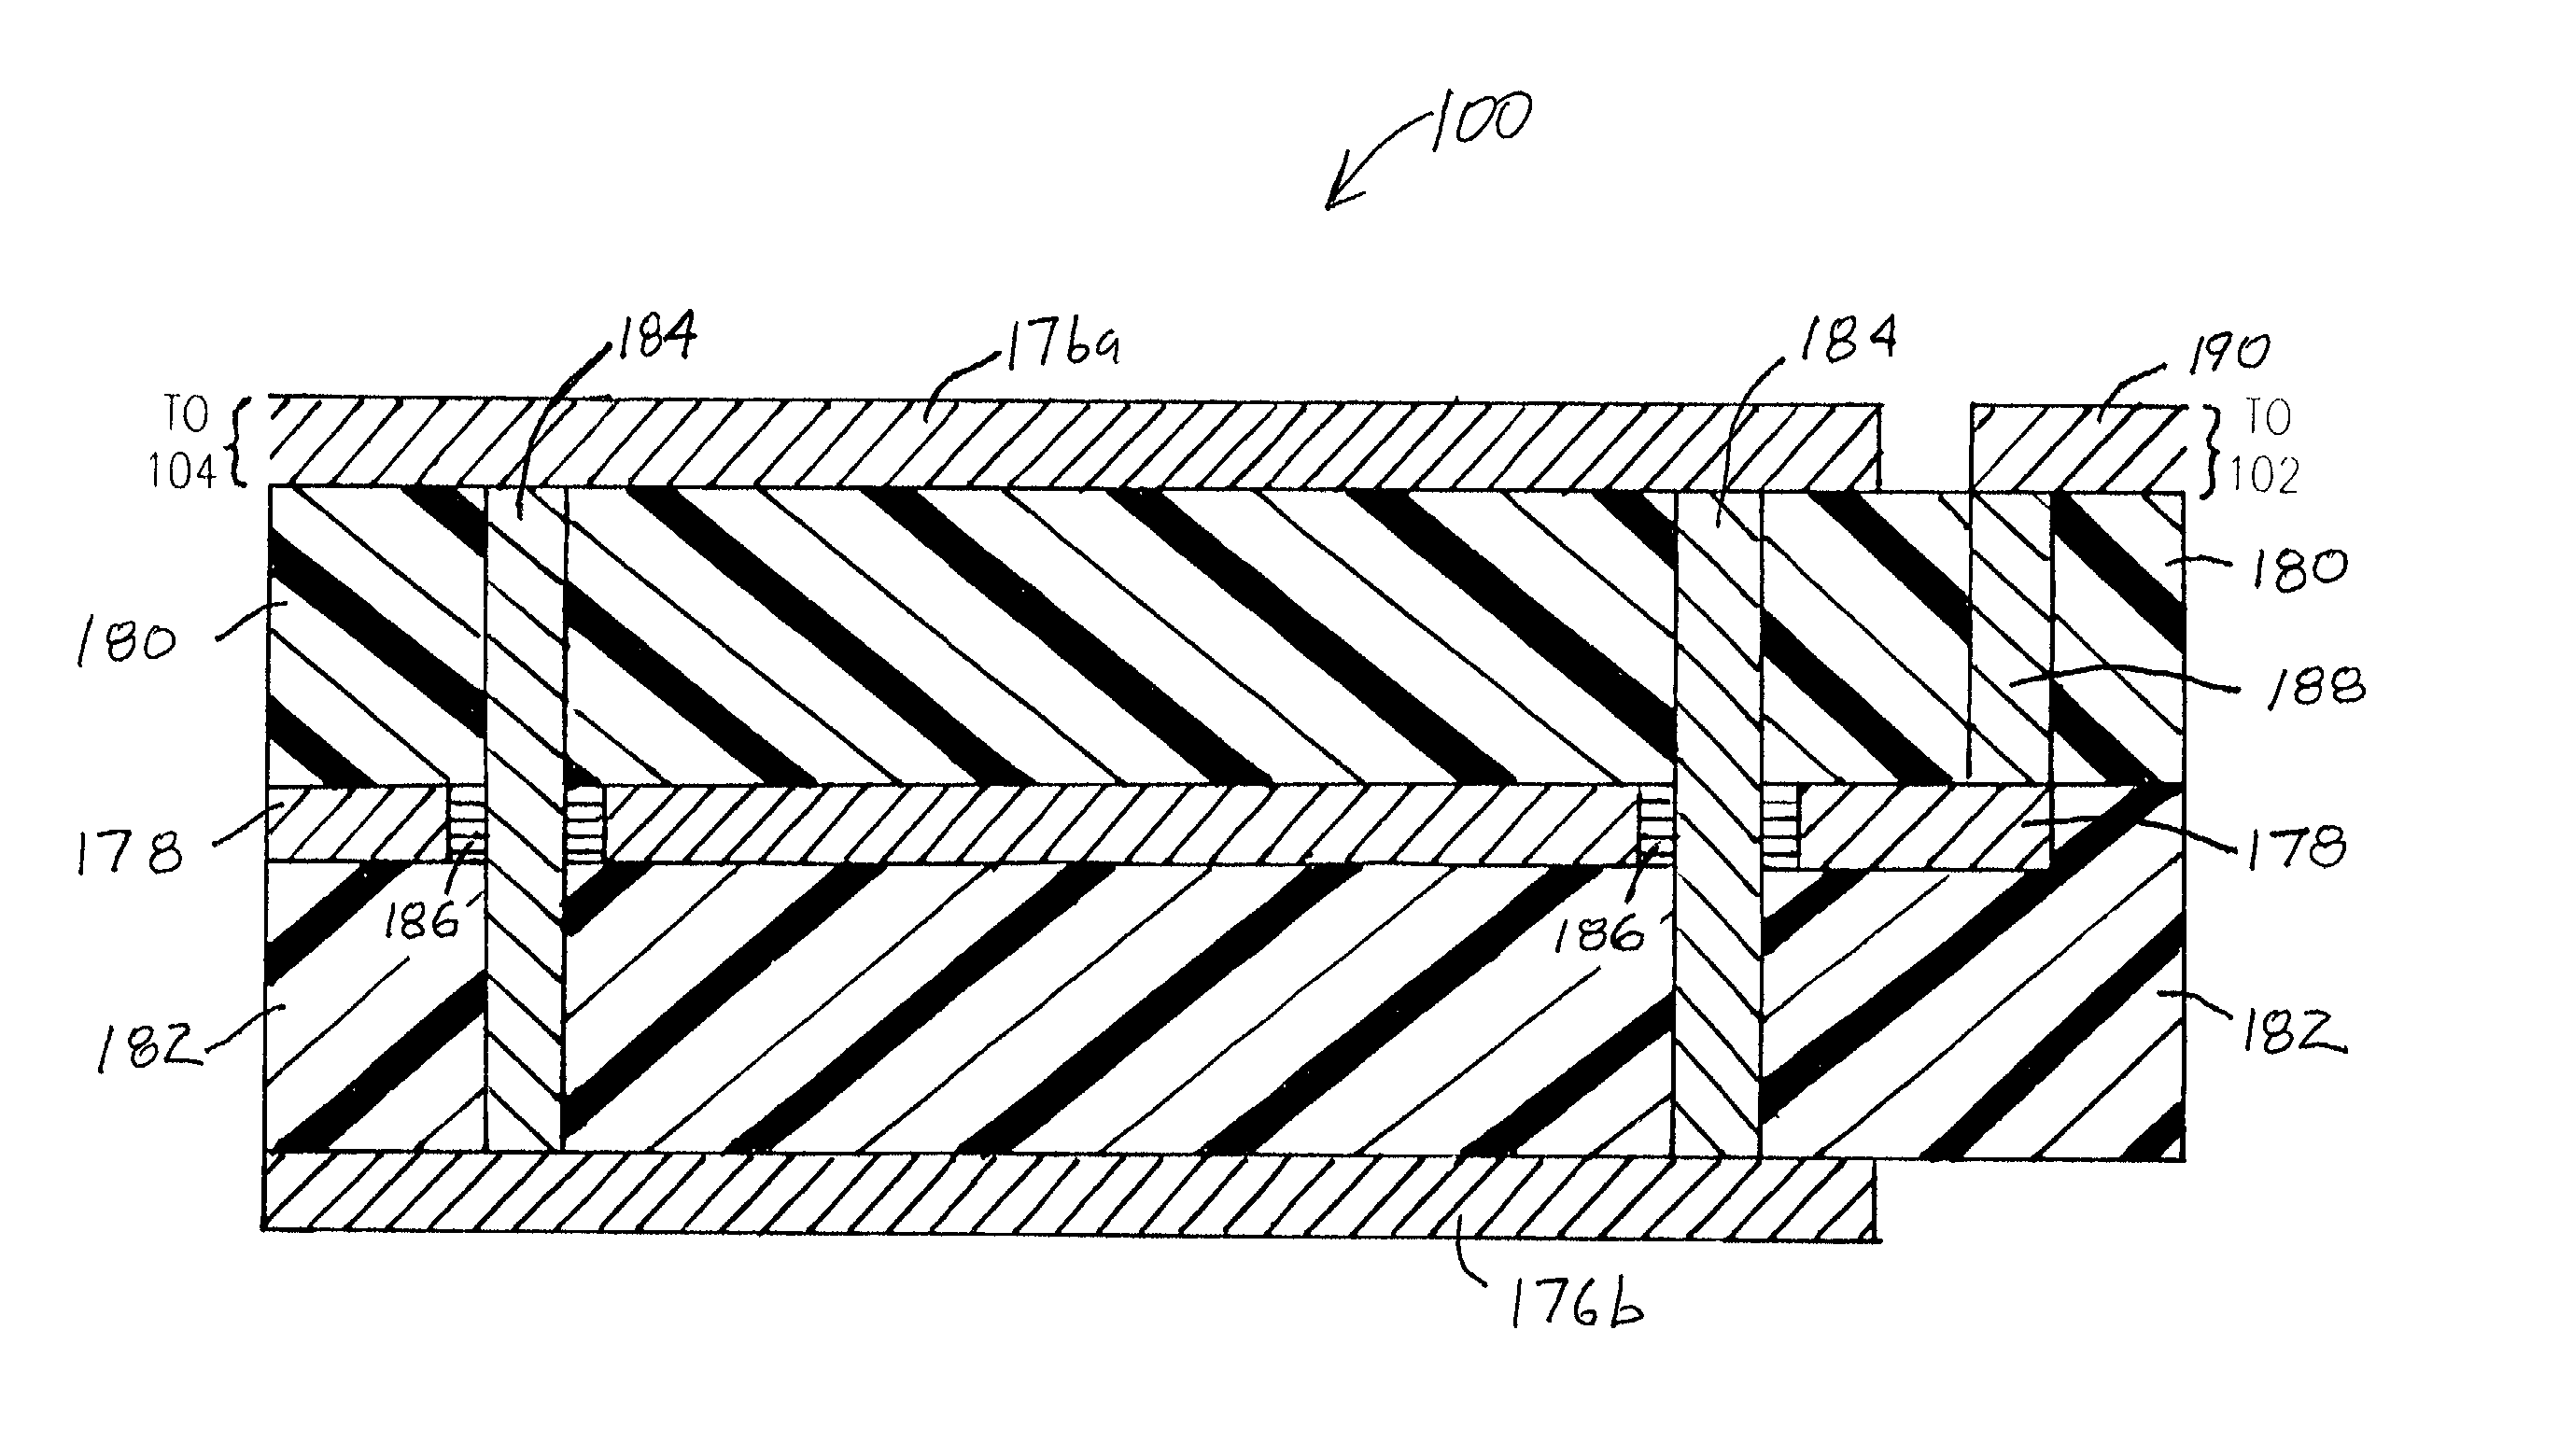 Circuit board capacitor structure for forming a high voltage isolation barrier